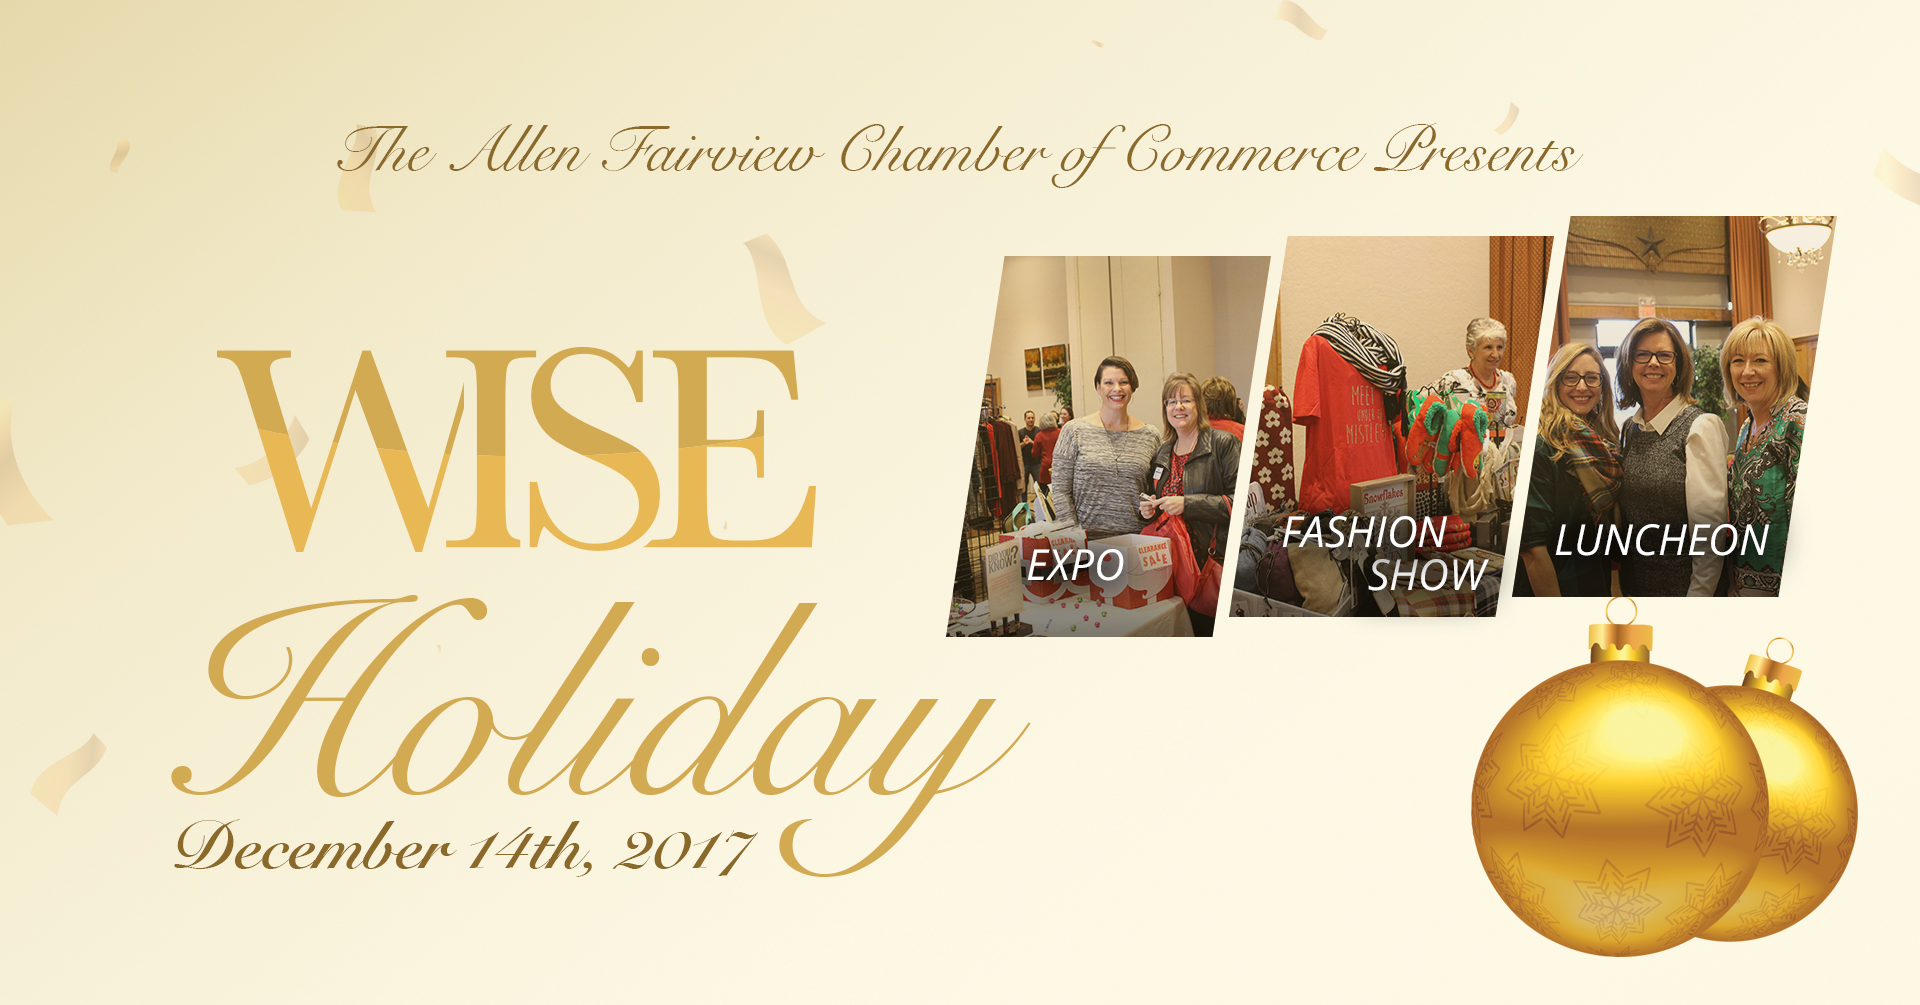 WISE Holiday Expo, Fashion Show & Luncheon